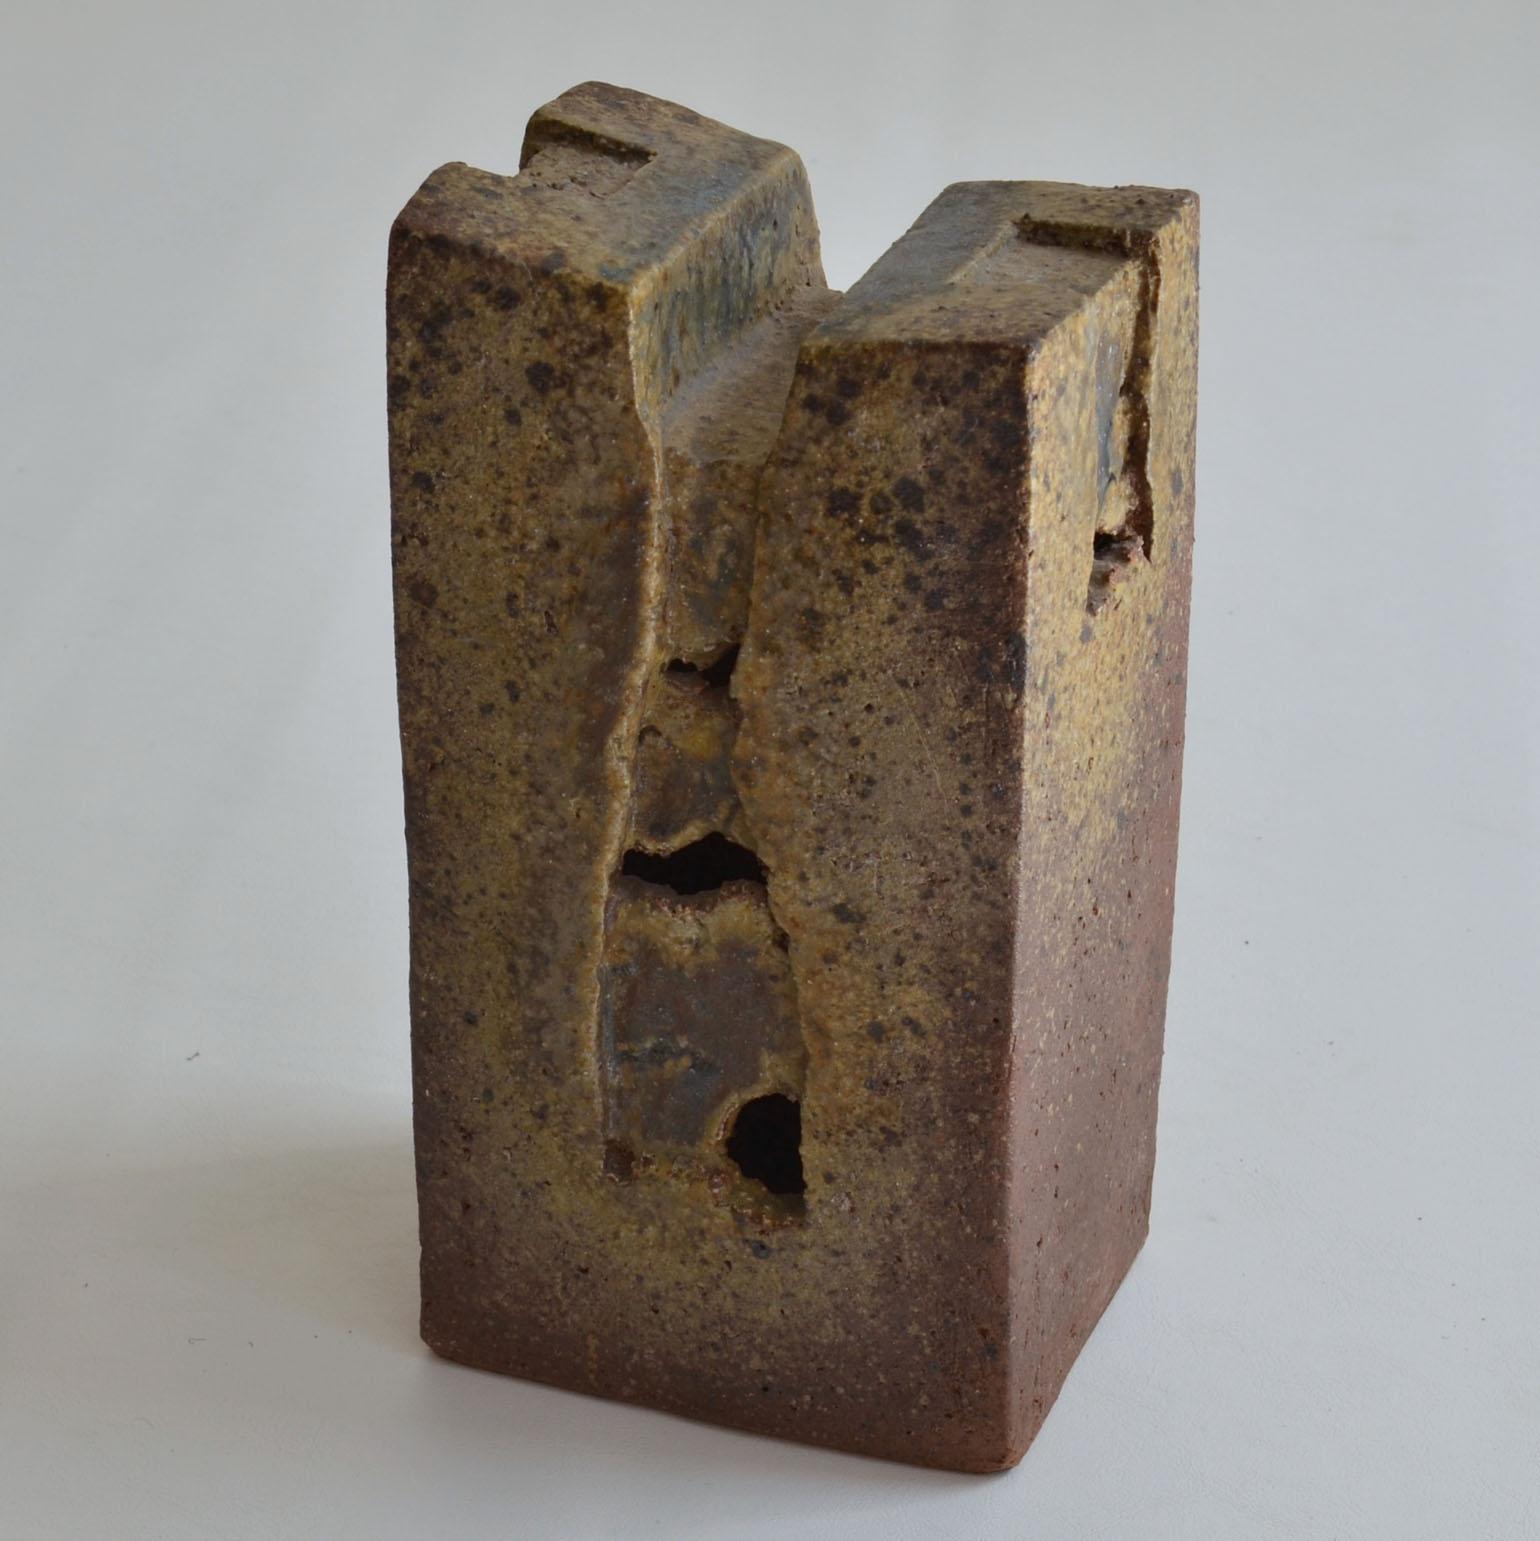 Architectural Abstract Ceramic Sculpture in Earth Tones For Sale 2